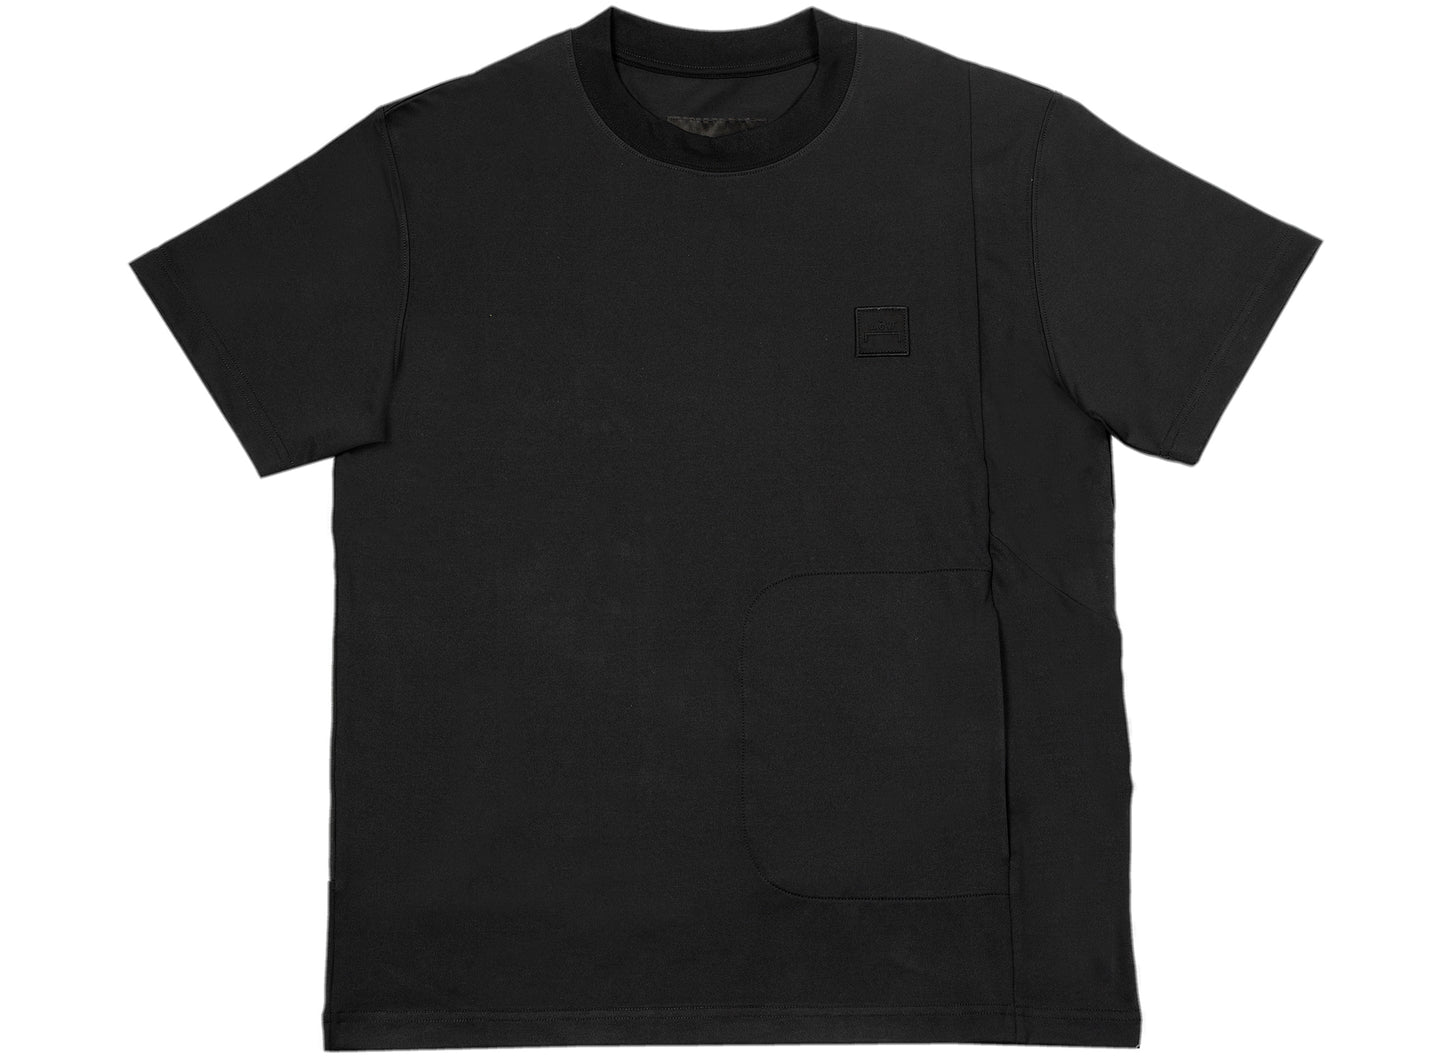 A-COLD-WALL* Utility Short Sleeve Tee in Black